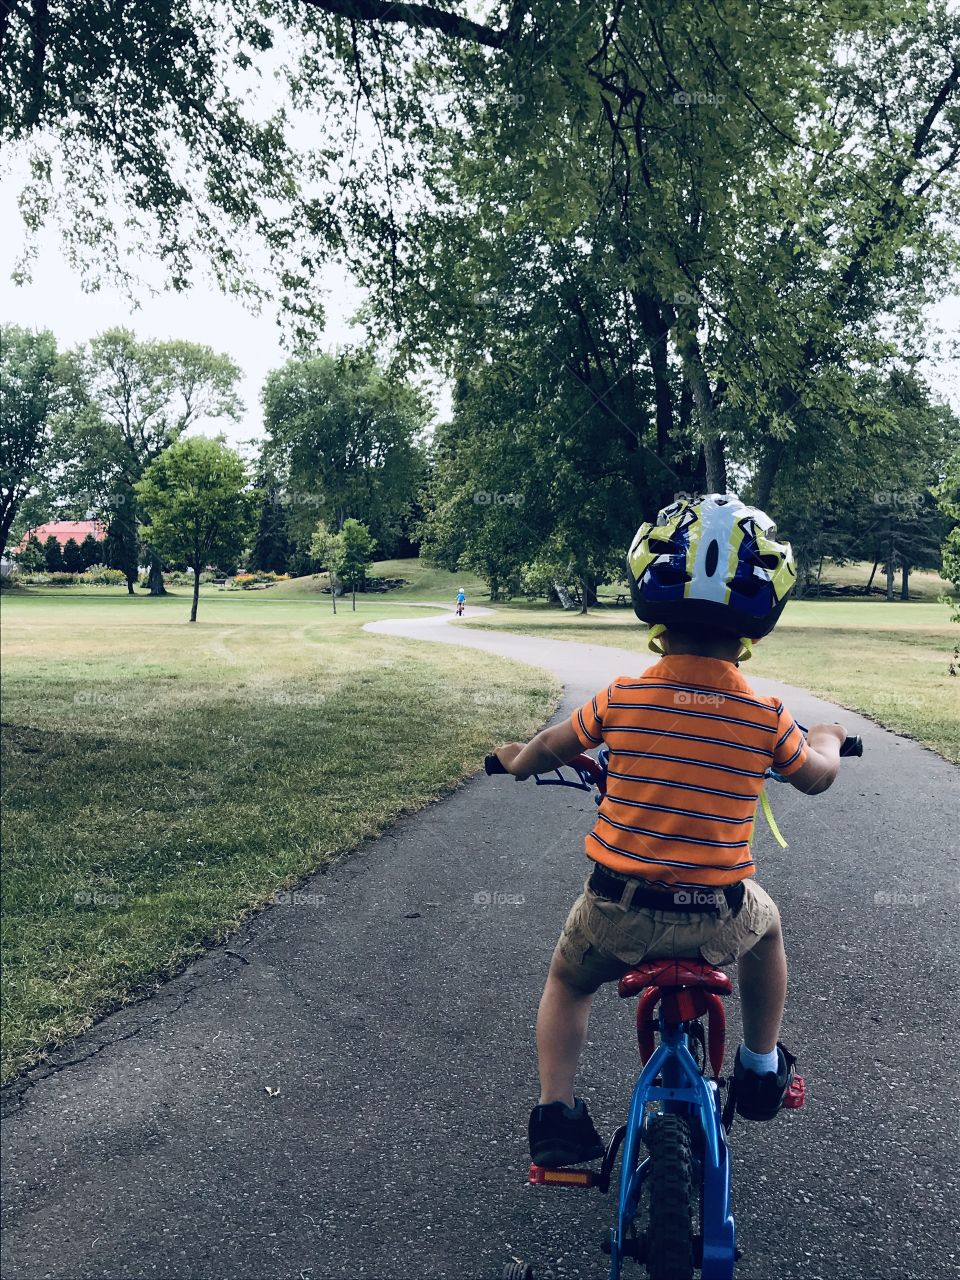 Young boy riding a bicycle down a park path